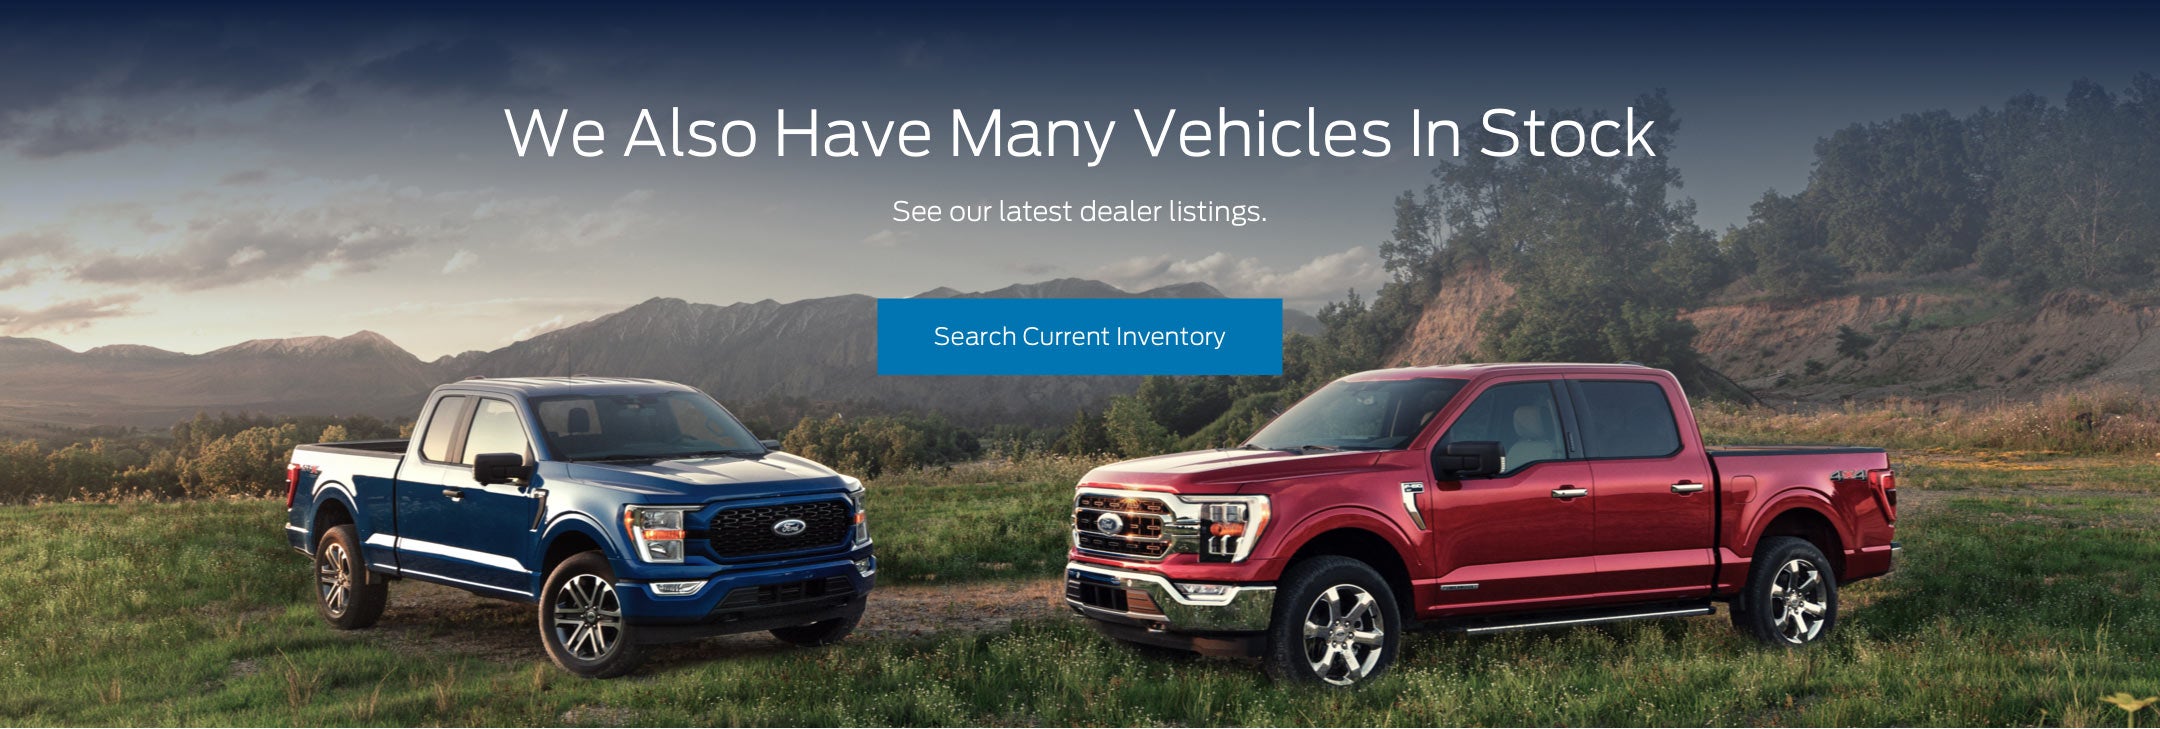 Ford vehicles in stock | Sarchione Ford of Alliance in Alliance OH